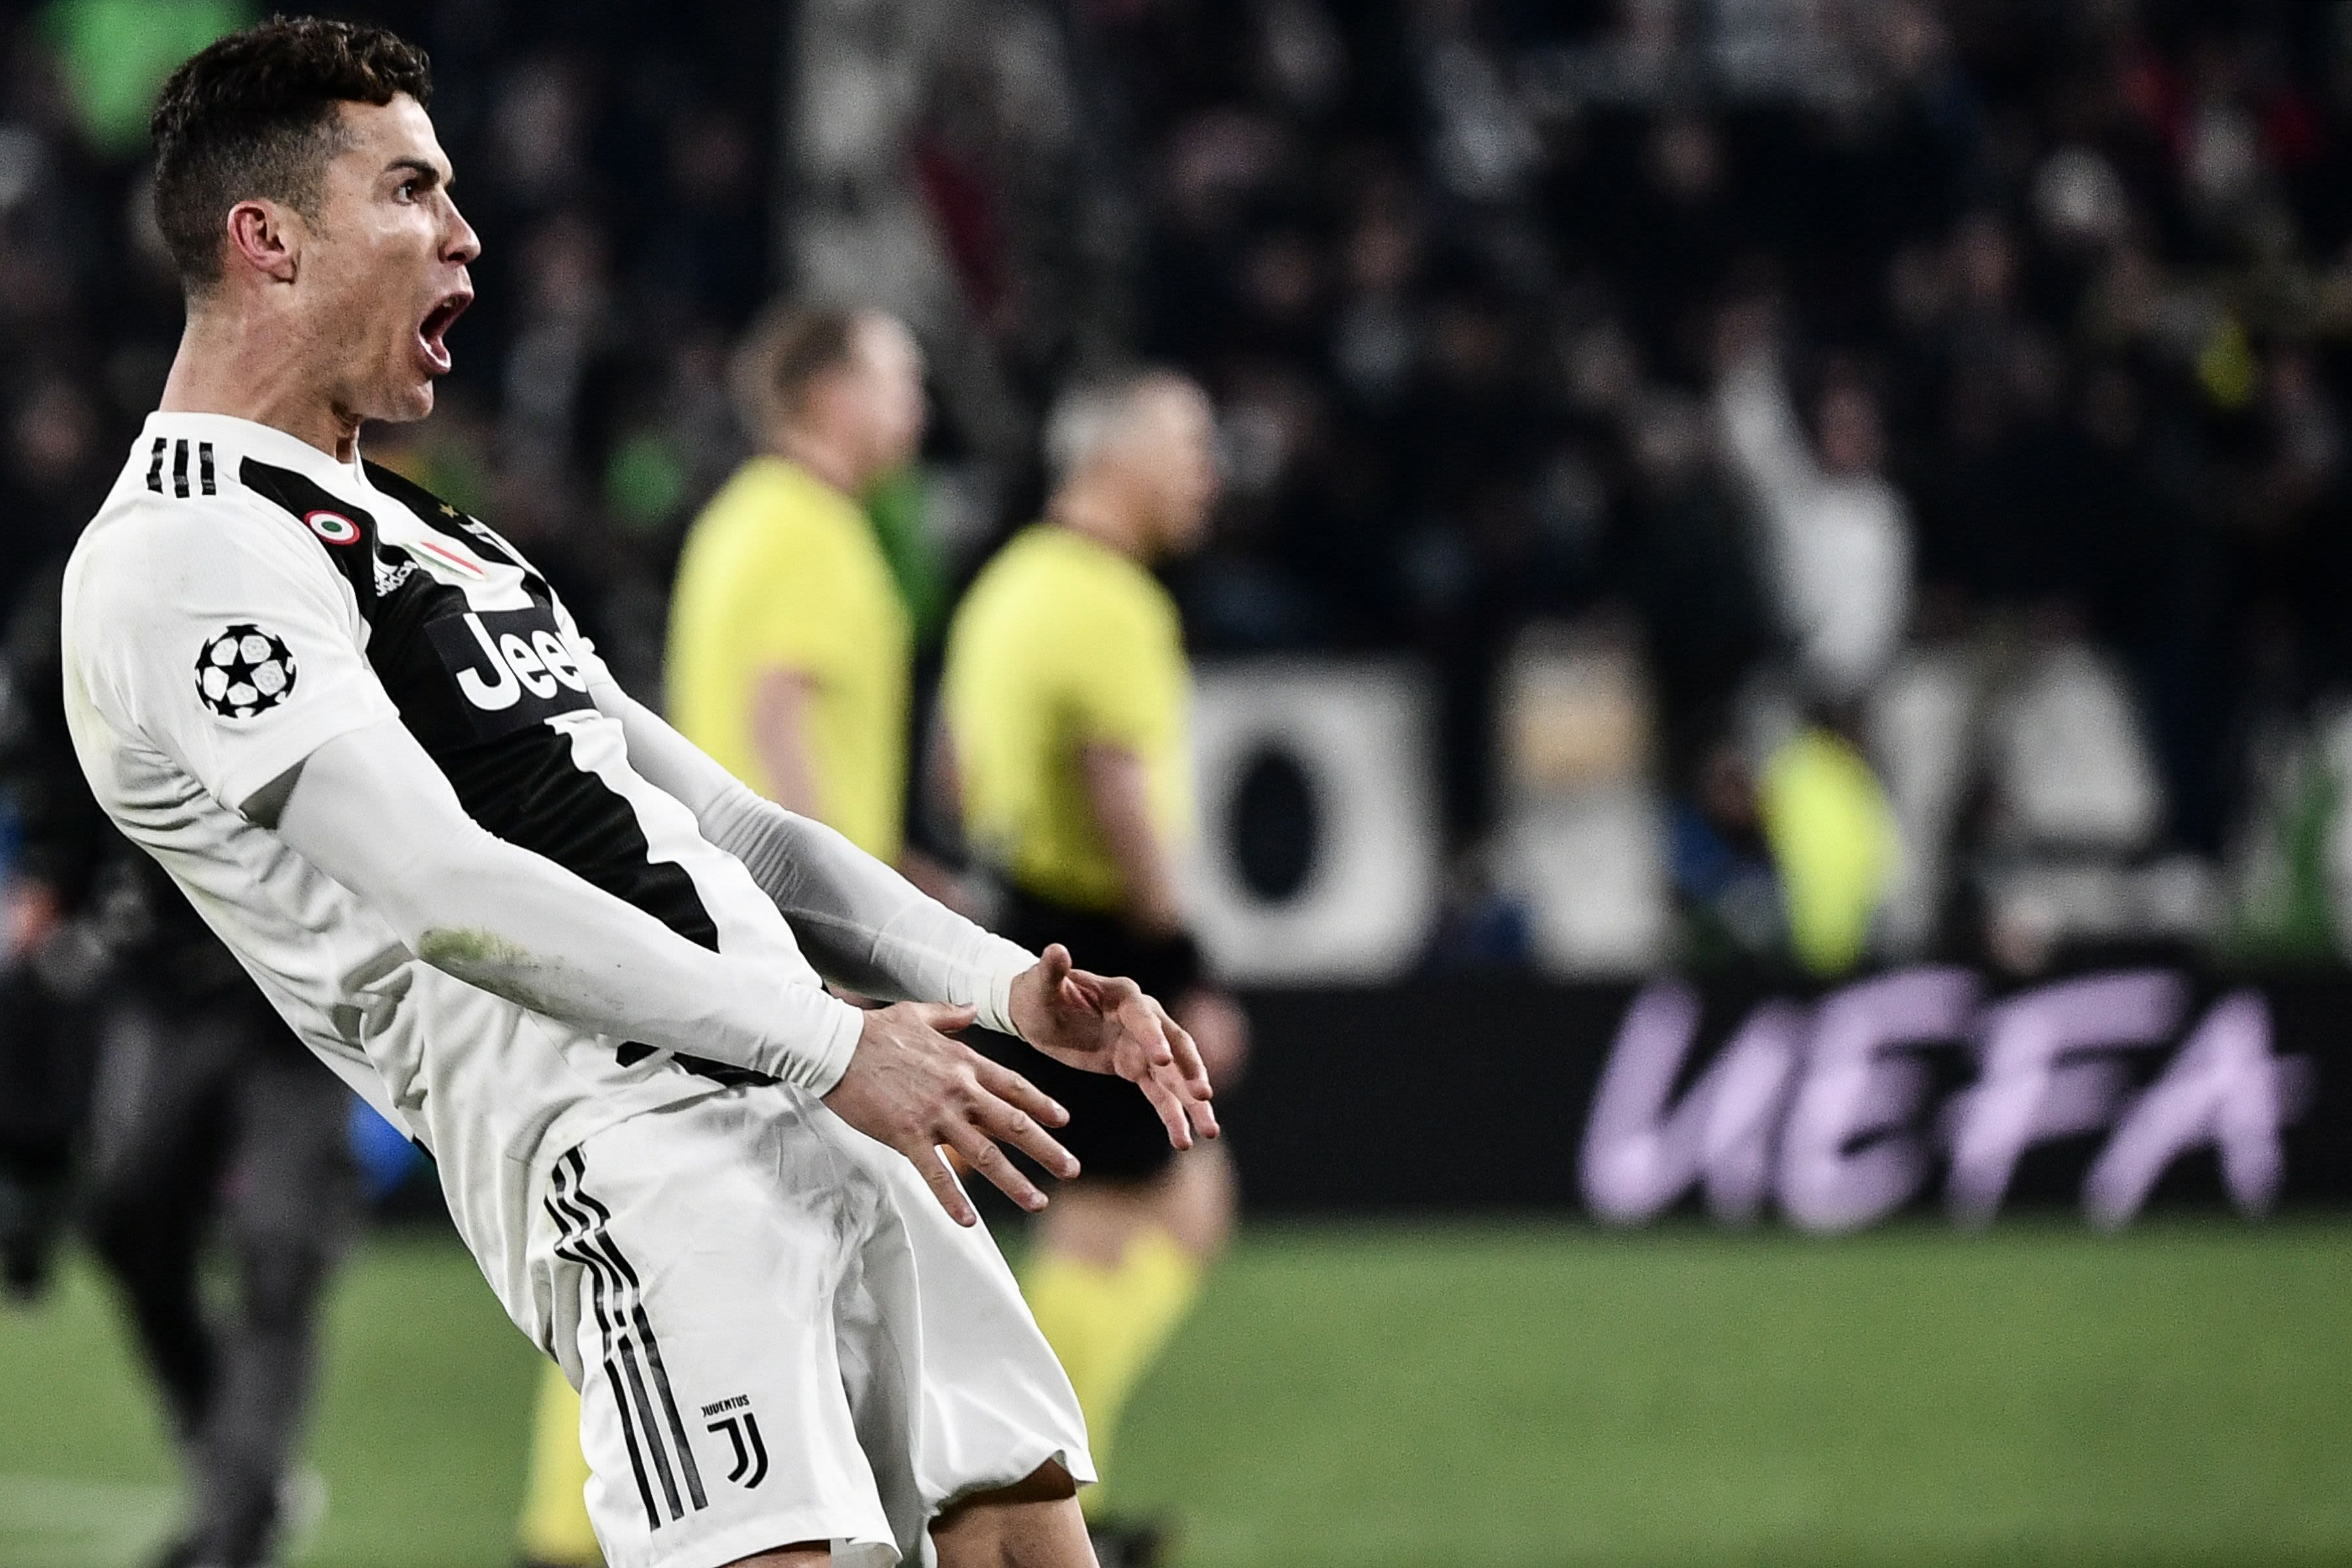 Champions League soccer: Juventus' Cristiano Ronaldo ruled out vs